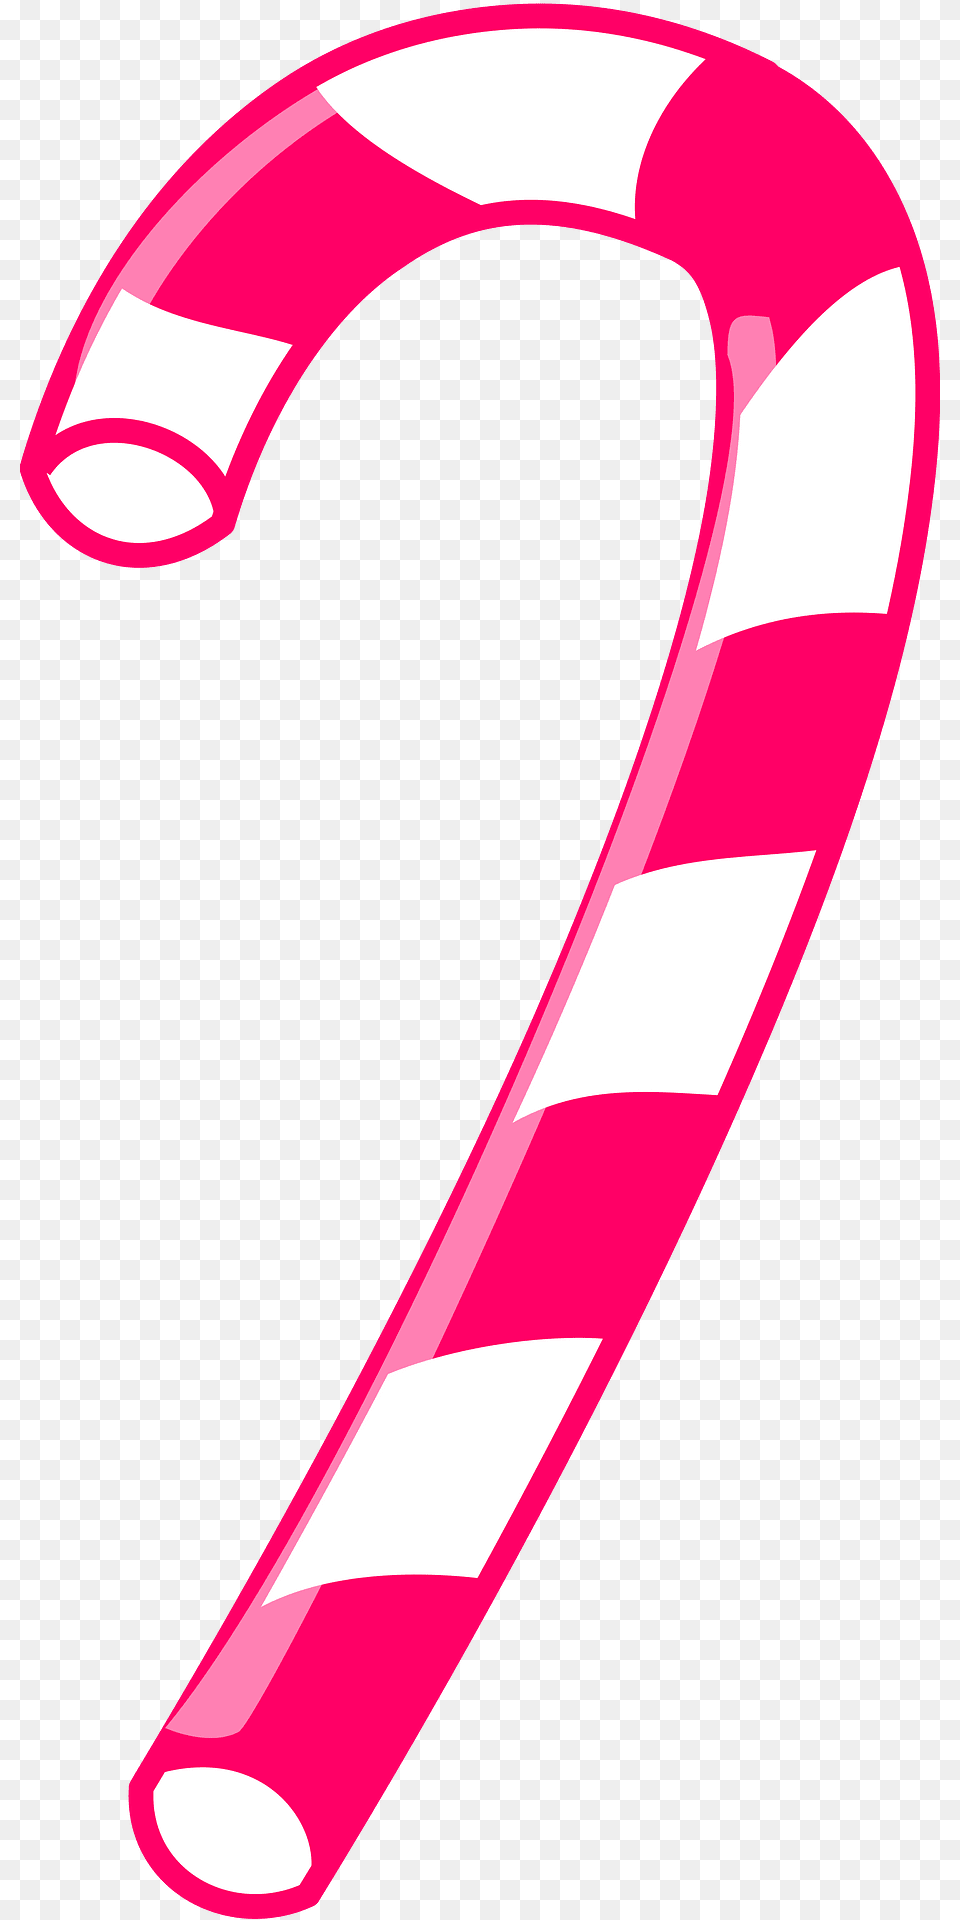 Candy Cane Clipart, Food, Sweets, Stick, Dynamite Png